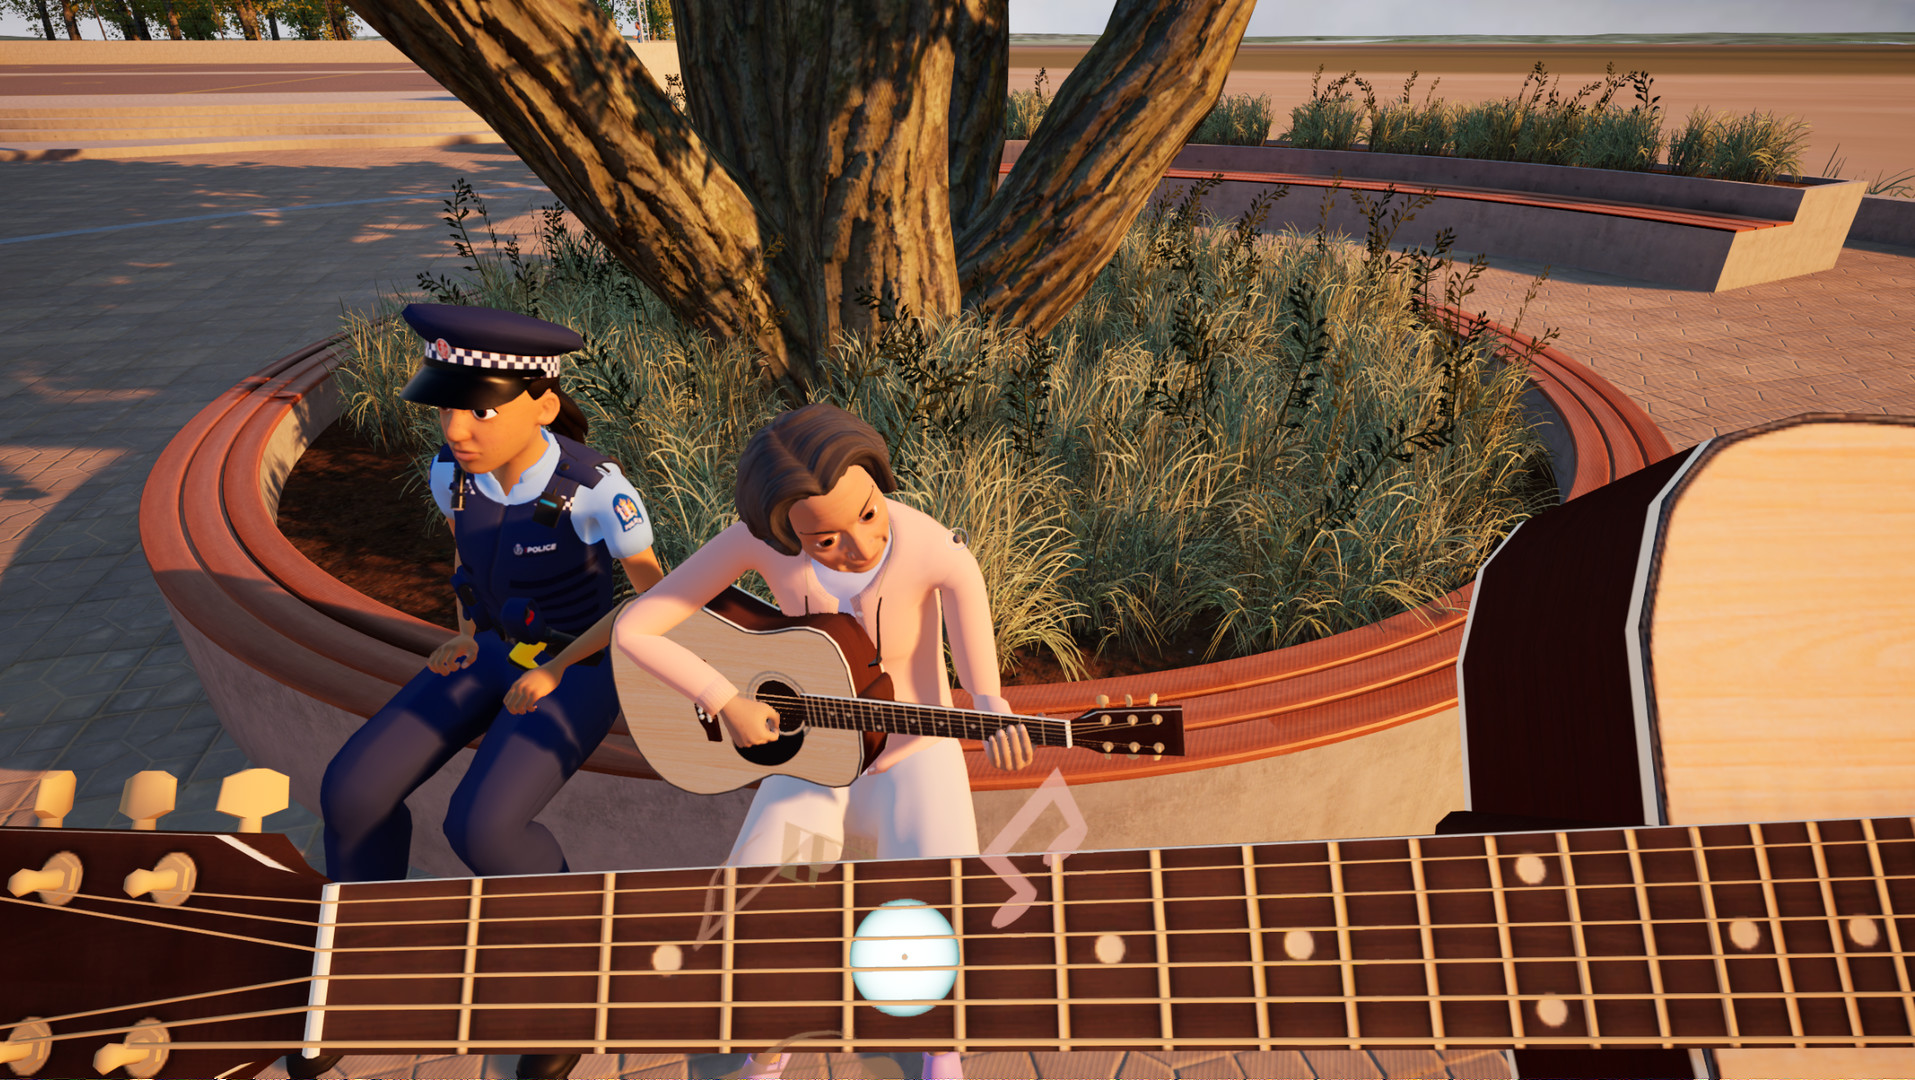 Beto — Guitar (Pose pack) Poses for kids playing...